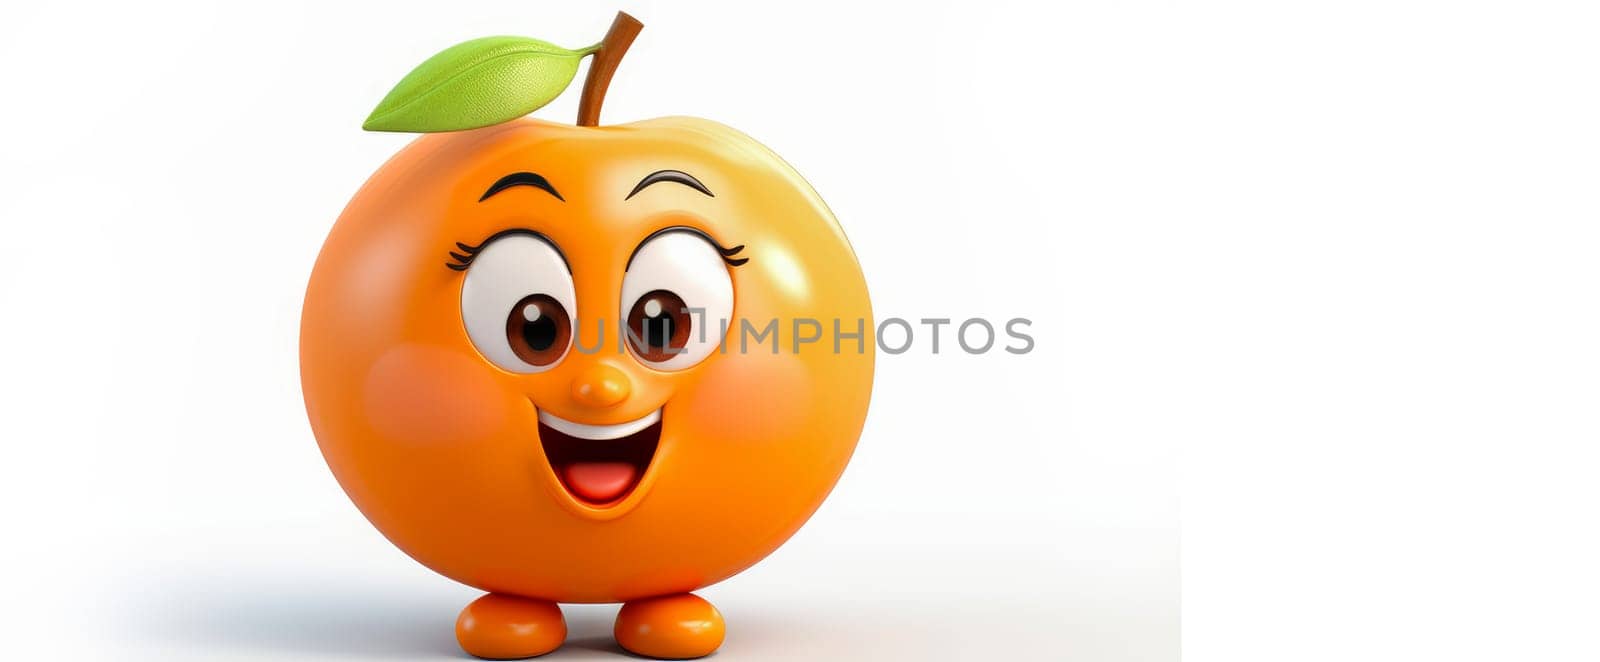 Orange Apricot with a cheerful face 3D on a white background. by Alla_Yurtayeva